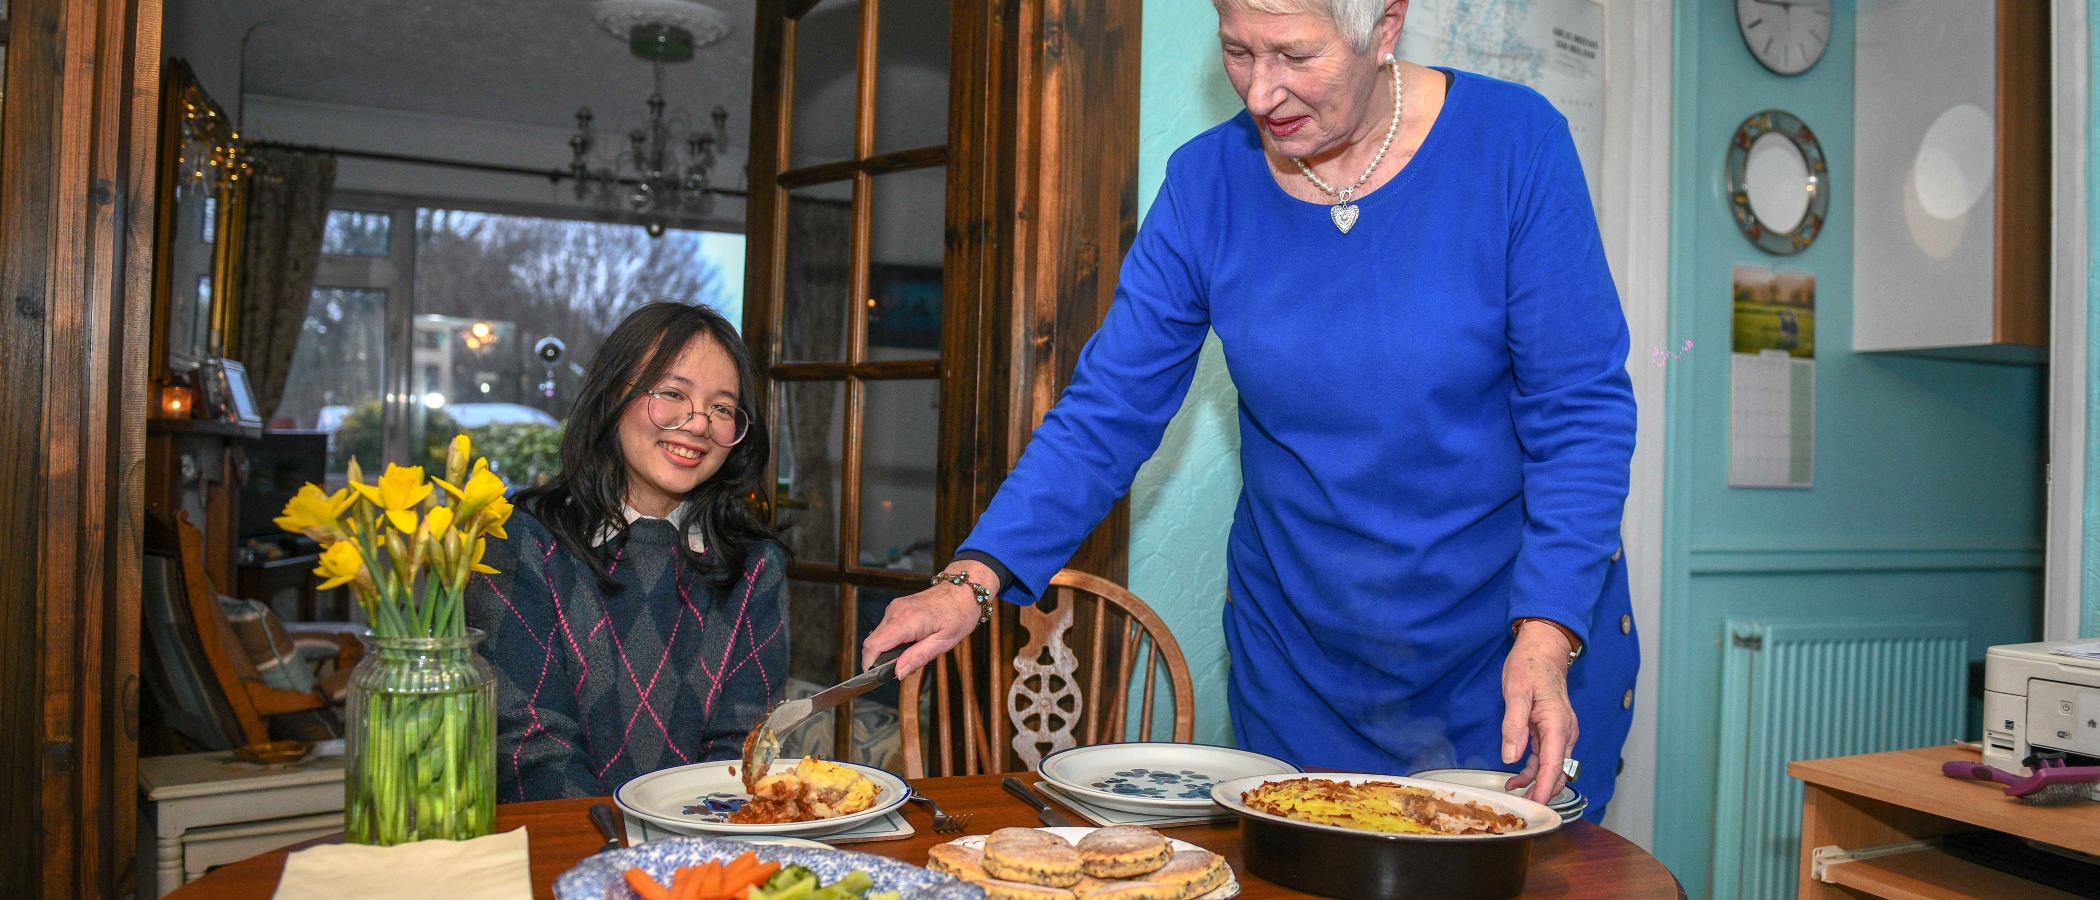 An international student sitting at a dining table while their host serves them food